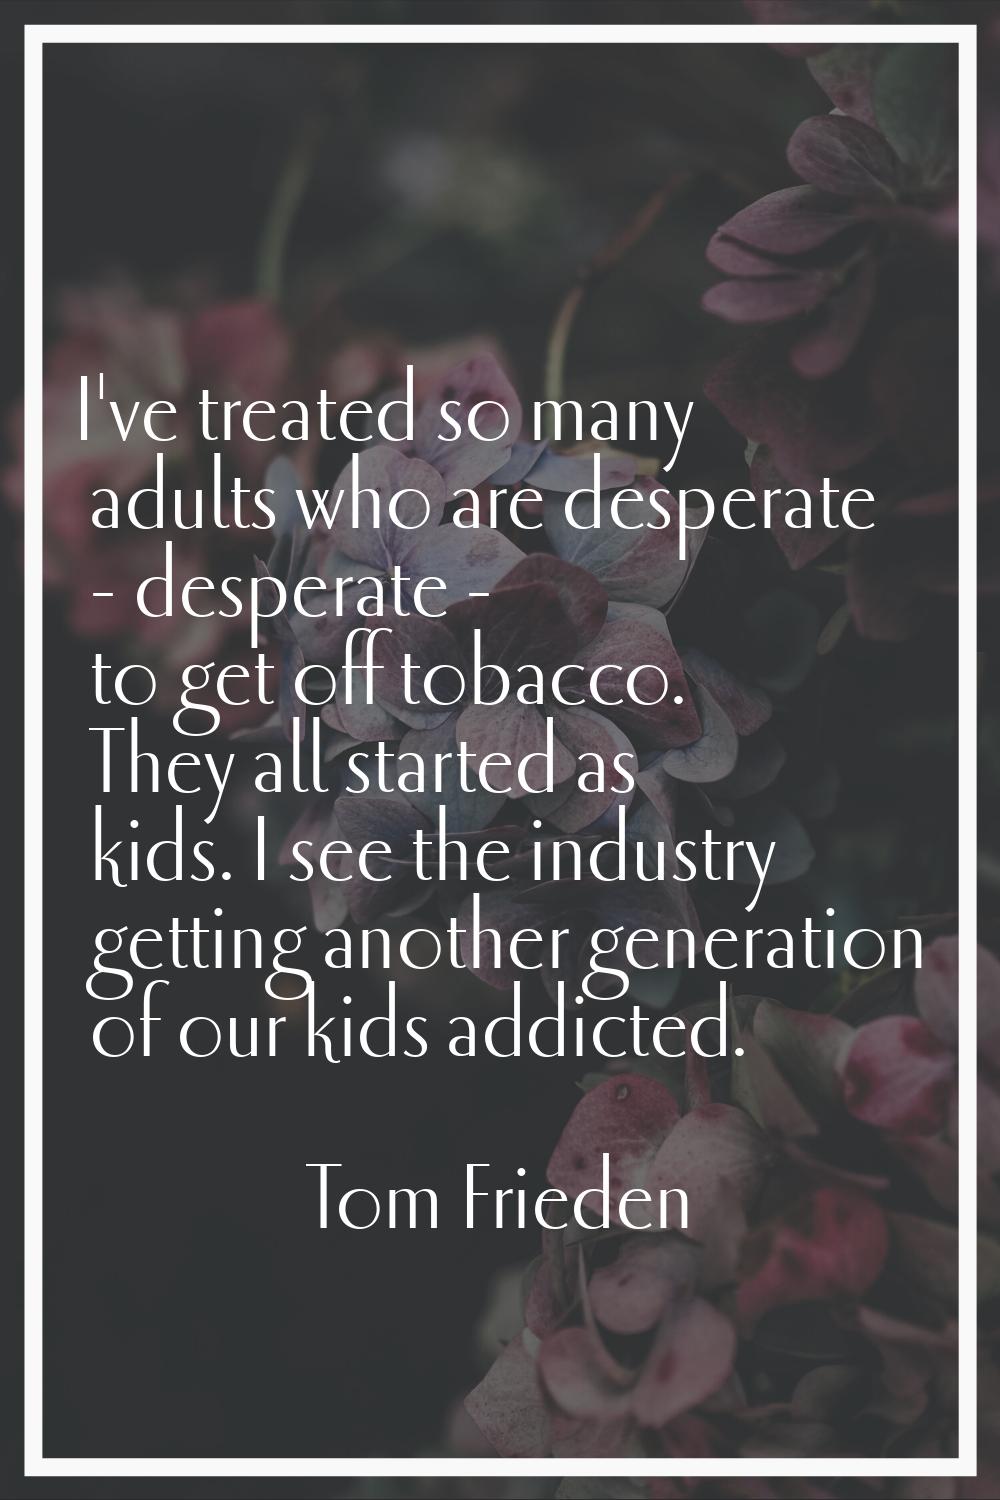 I've treated so many adults who are desperate - desperate - to get off tobacco. They all started as